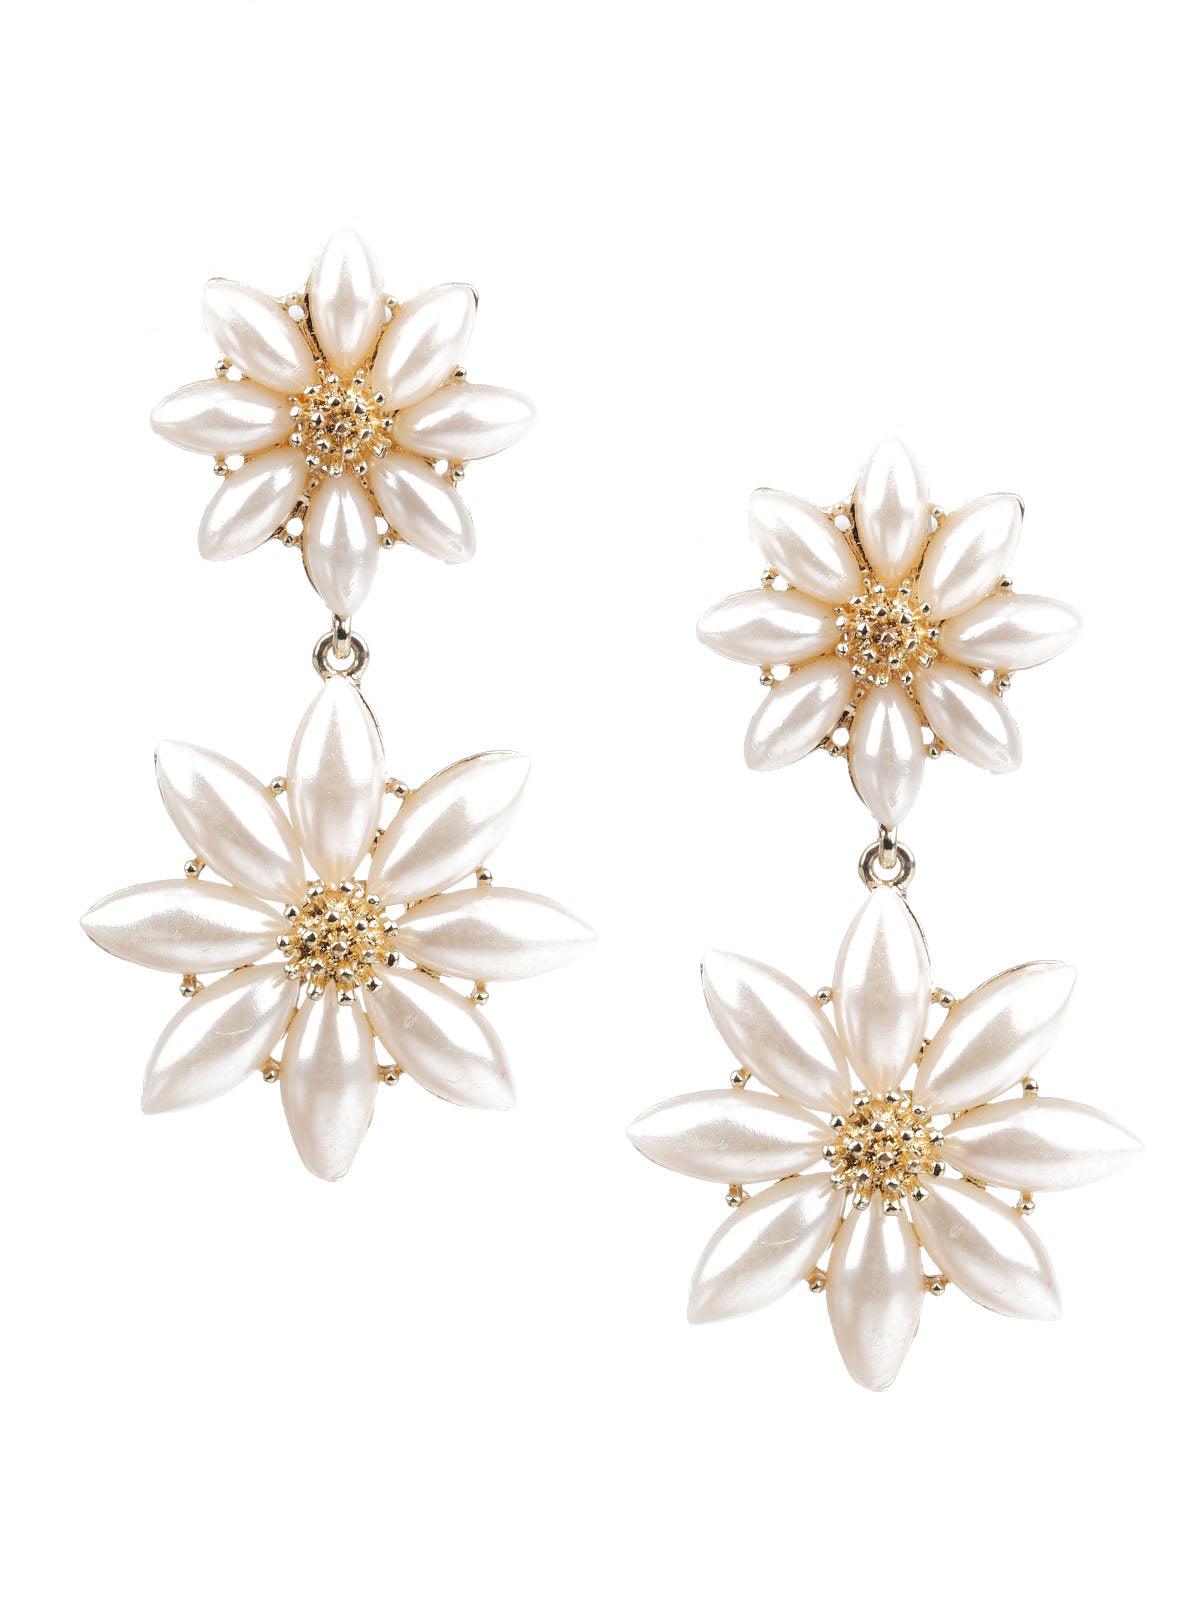 CLASSY GOLD AND WHITE DANGLE EARRINGS - Odette